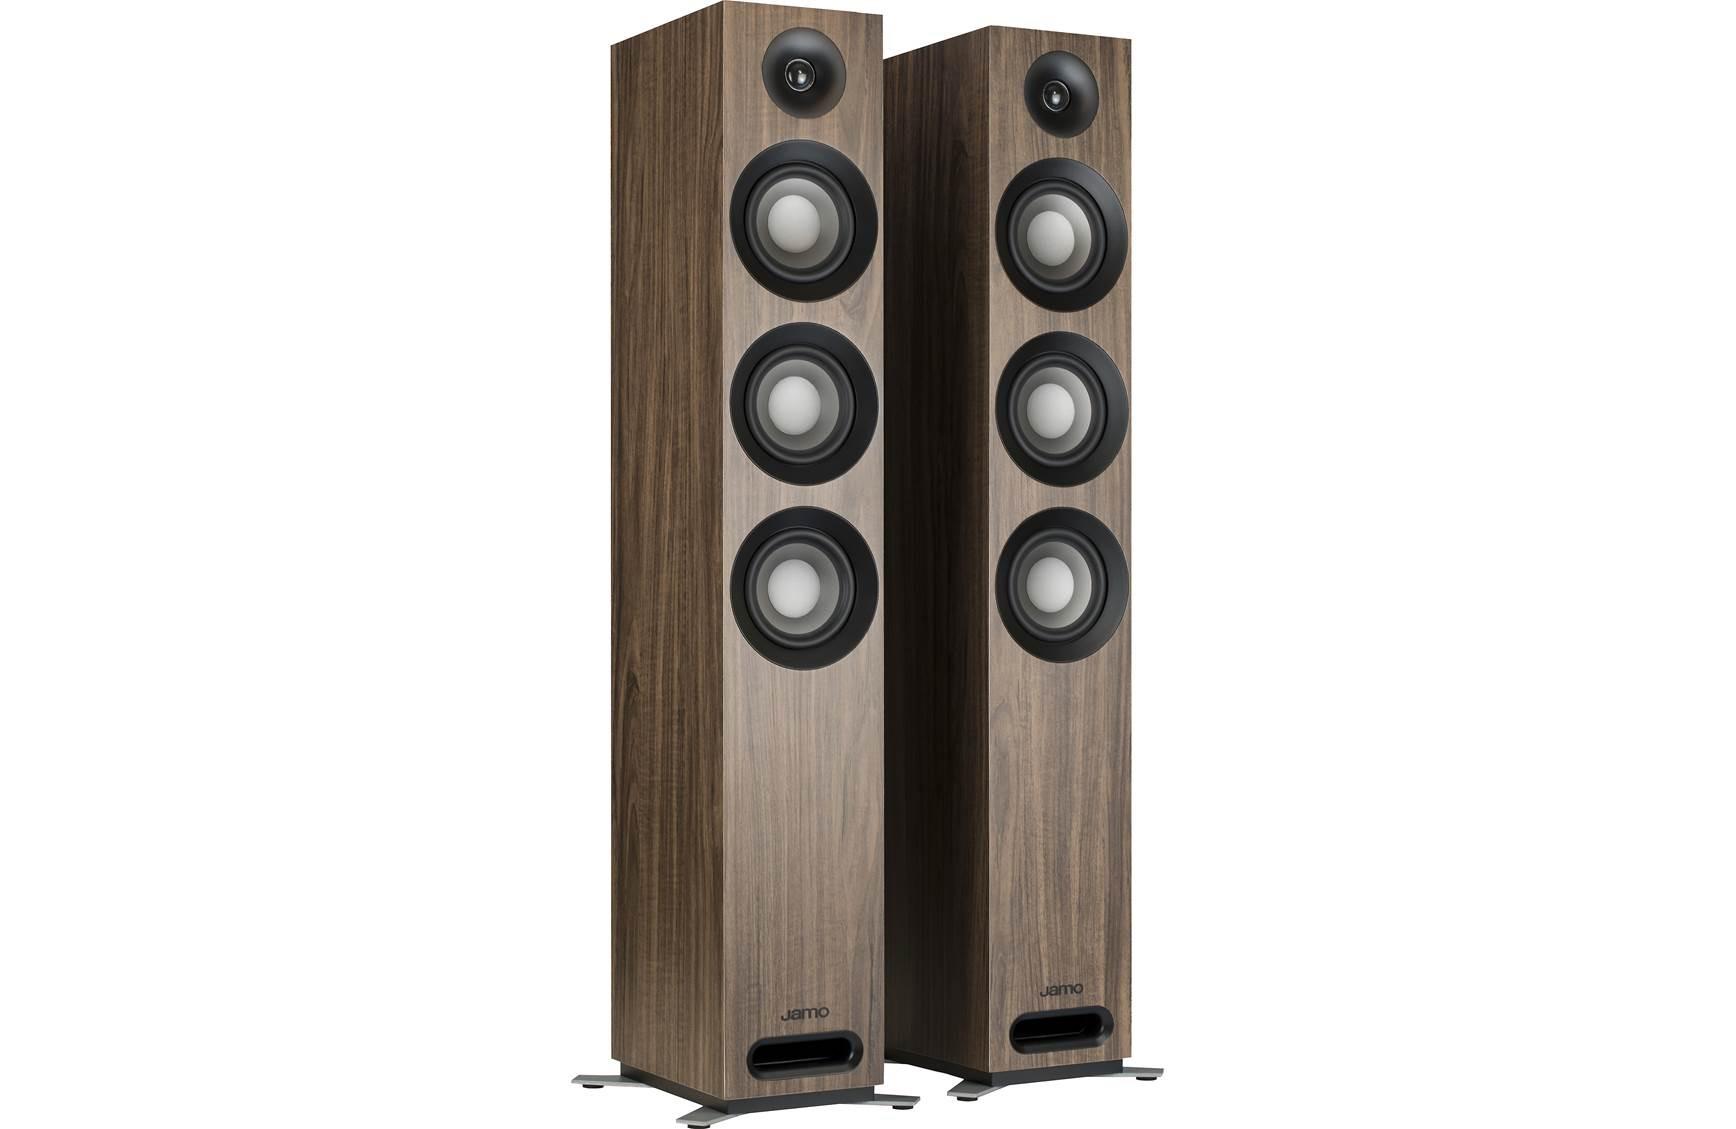 Many people will say that you need to spend several thousand dollars to get quality tower speakers. I can understand that some only want the best sound quality but saying that you need several thousand dollars for floor standing speakers is simply not true. Although it’s not impossible to find tower speakers for less than a thousand dollars, I’ll admit that it can be quite the challenge. best home theater seating fc358841 g701s809wn f 1